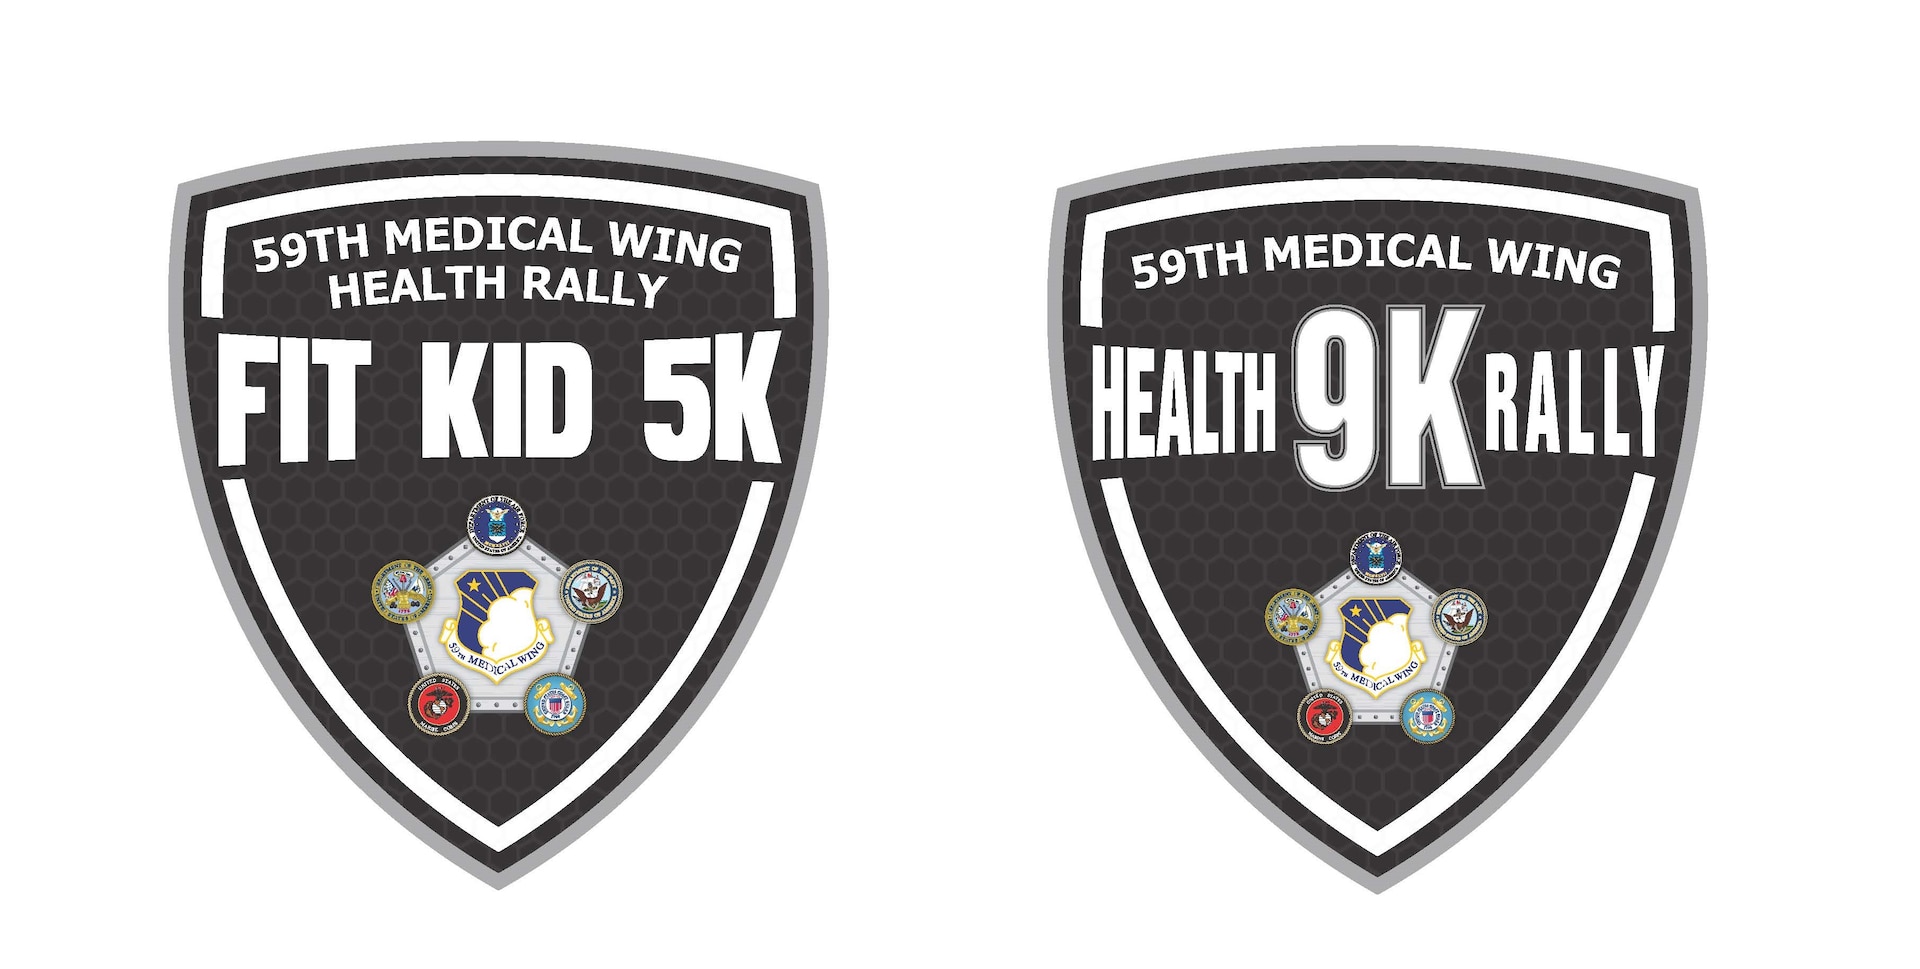 The 59th Medical Wing Health Rally – an event that attracted some 300 participants last year – returns to Airmen’s Heritage Park at Joint Base San Antonio-Randolph this month.